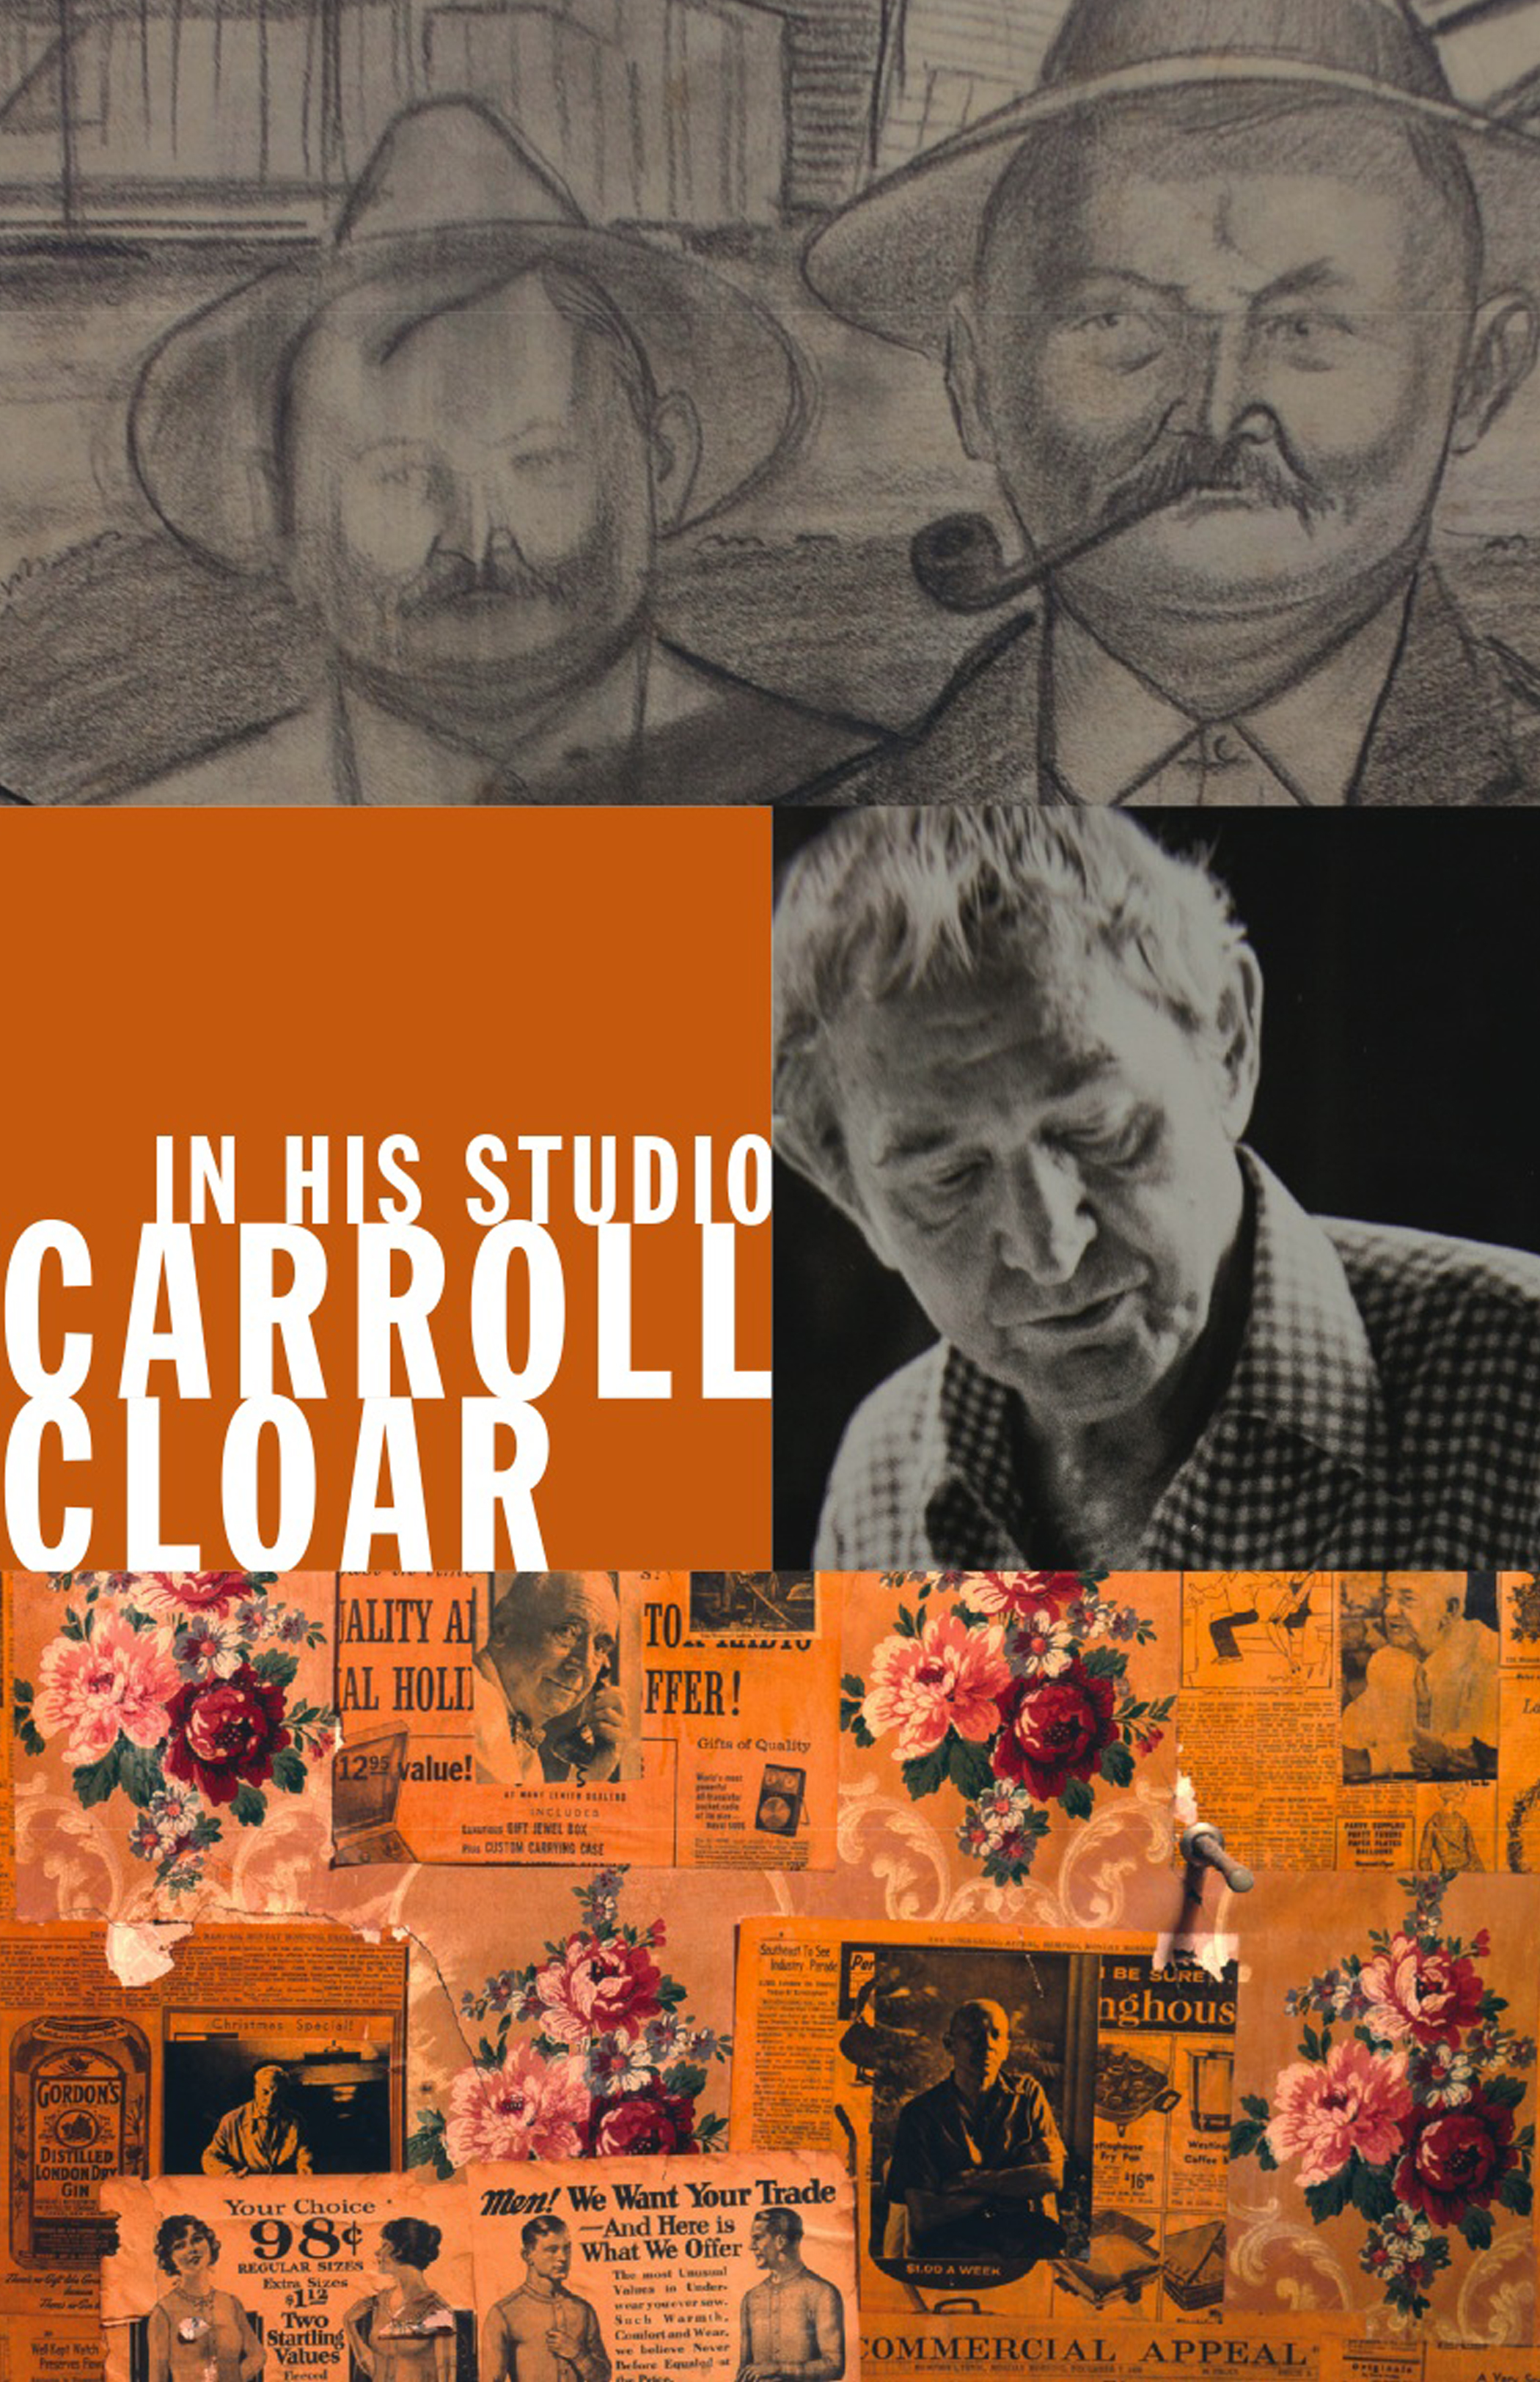  Carroll Cloar in His Studio  Exhibition postcard design  Creative direction and design by Chuck Mitchell  AMUM, Art Museum of the University of Memphis 